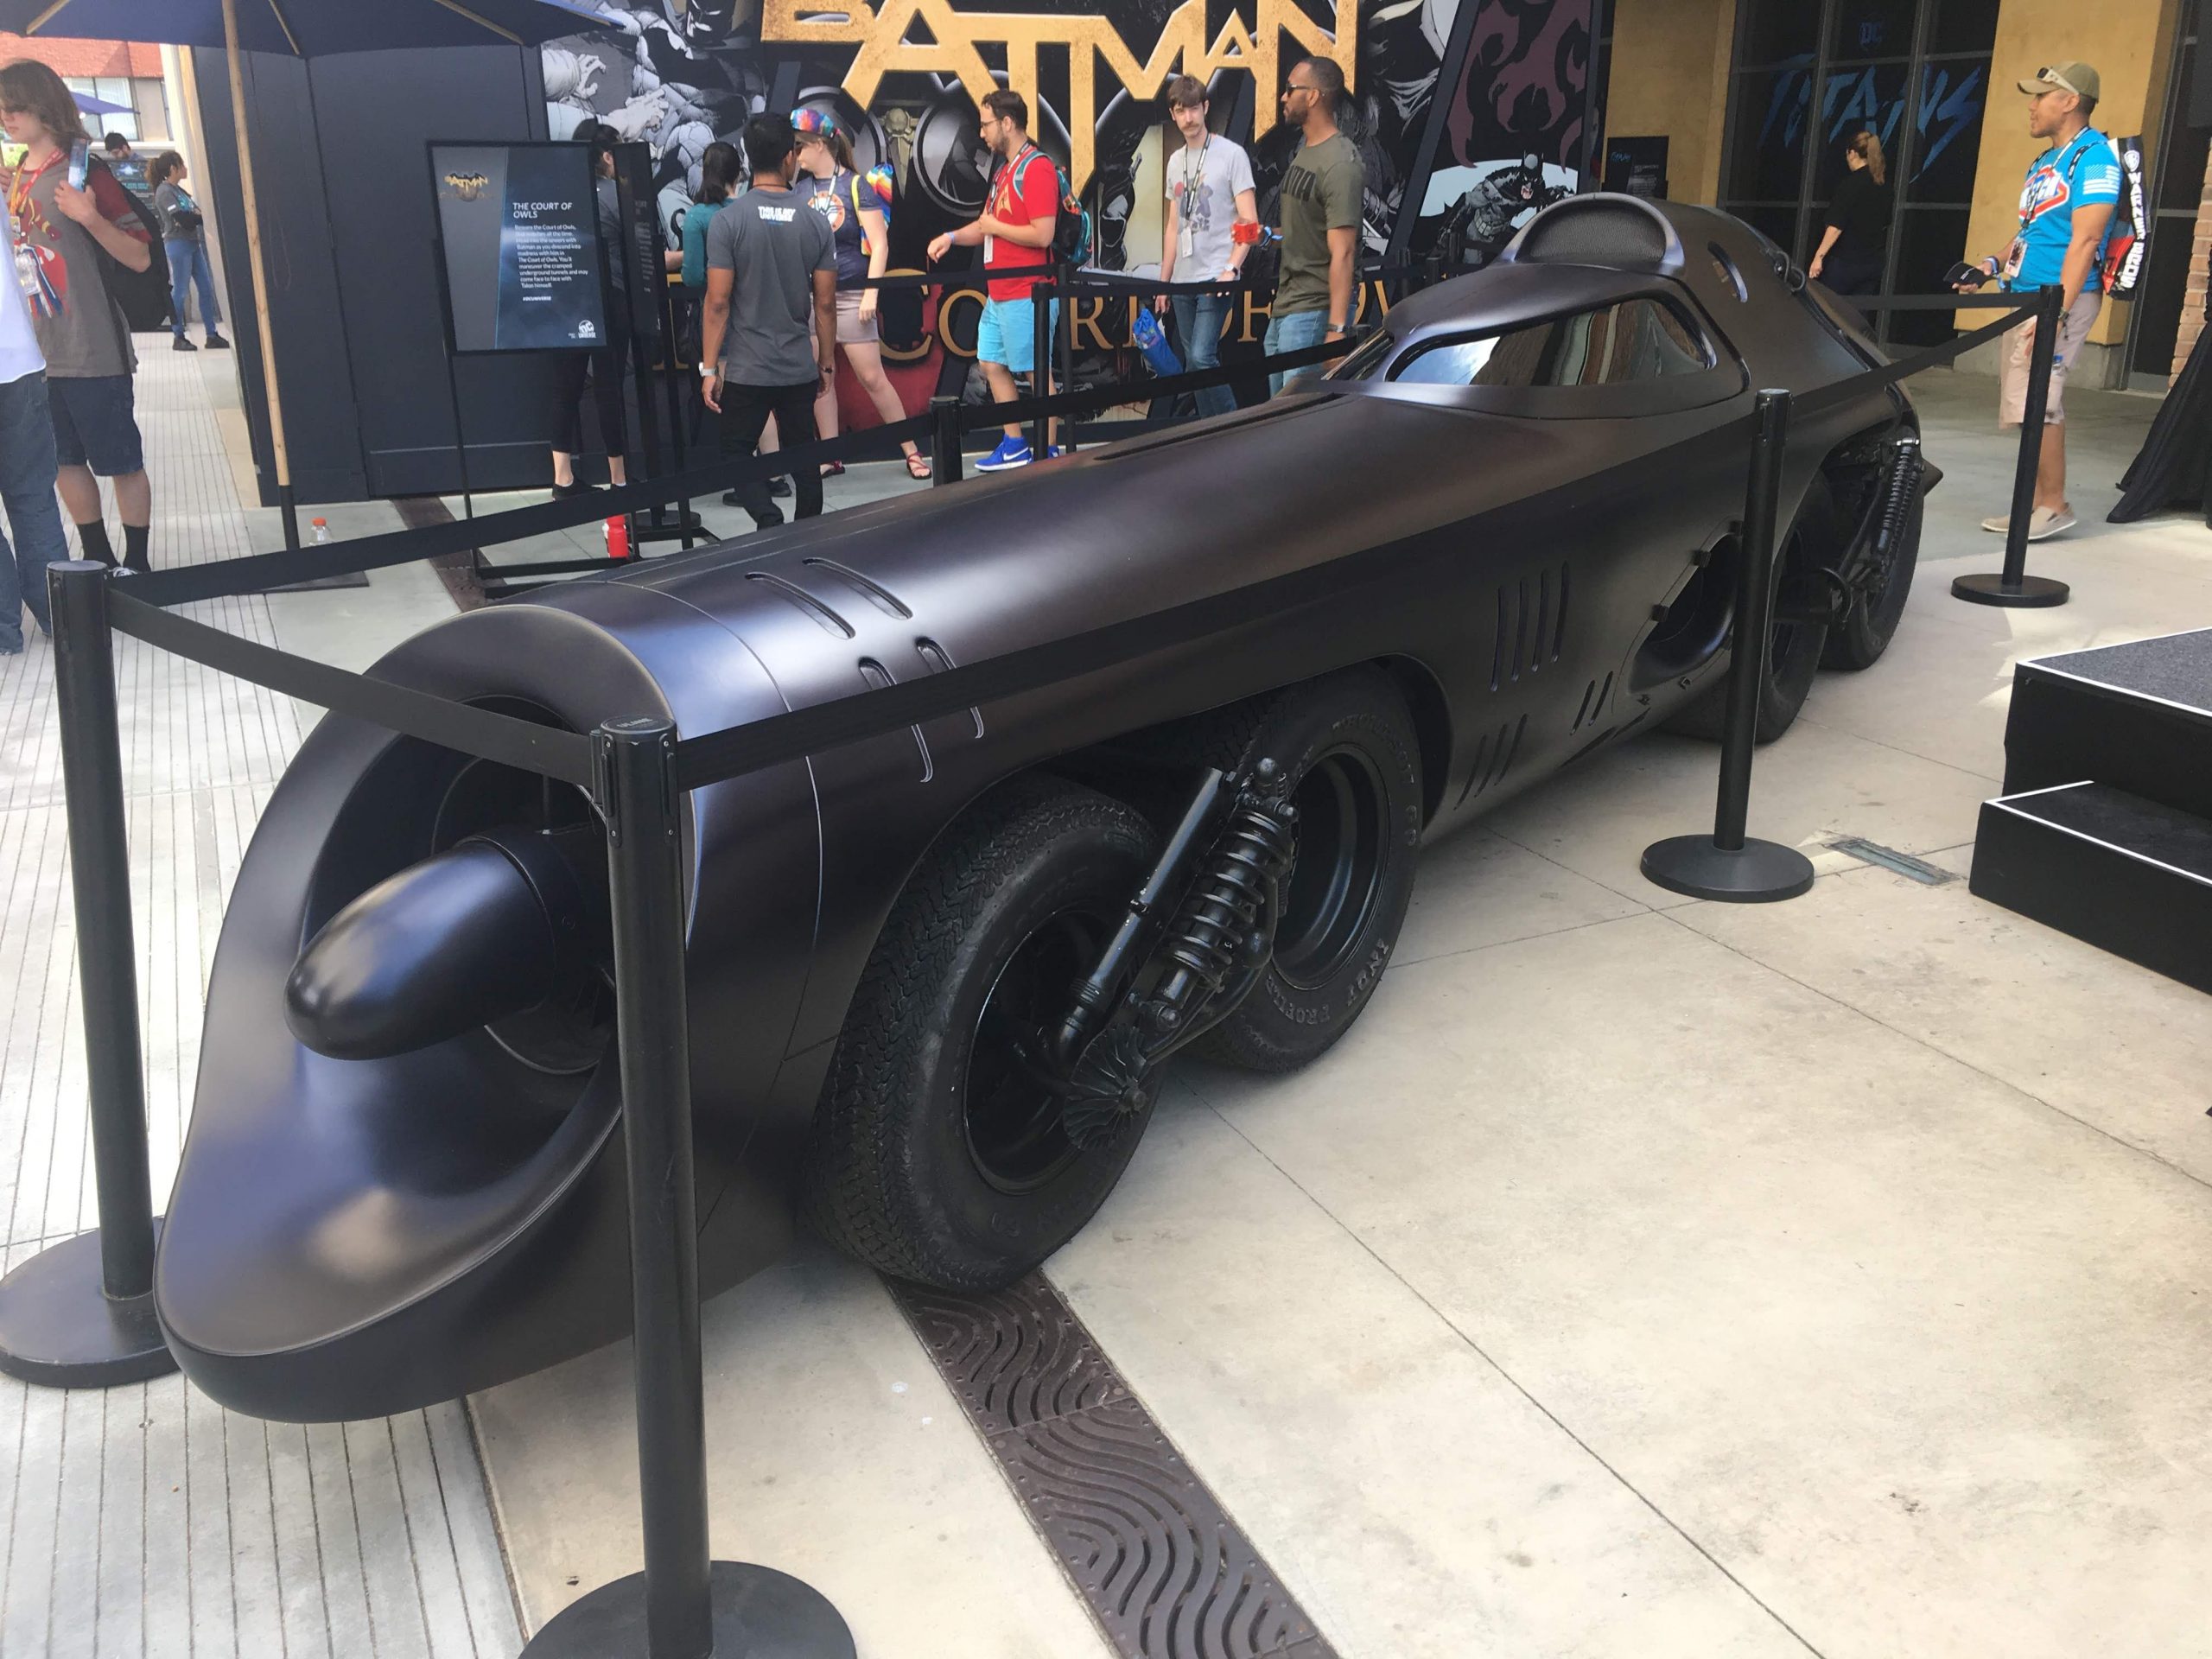 Fans Think Keaton’s Old Batmobile Is Back For The Flash But The Evidence Is Sketchy